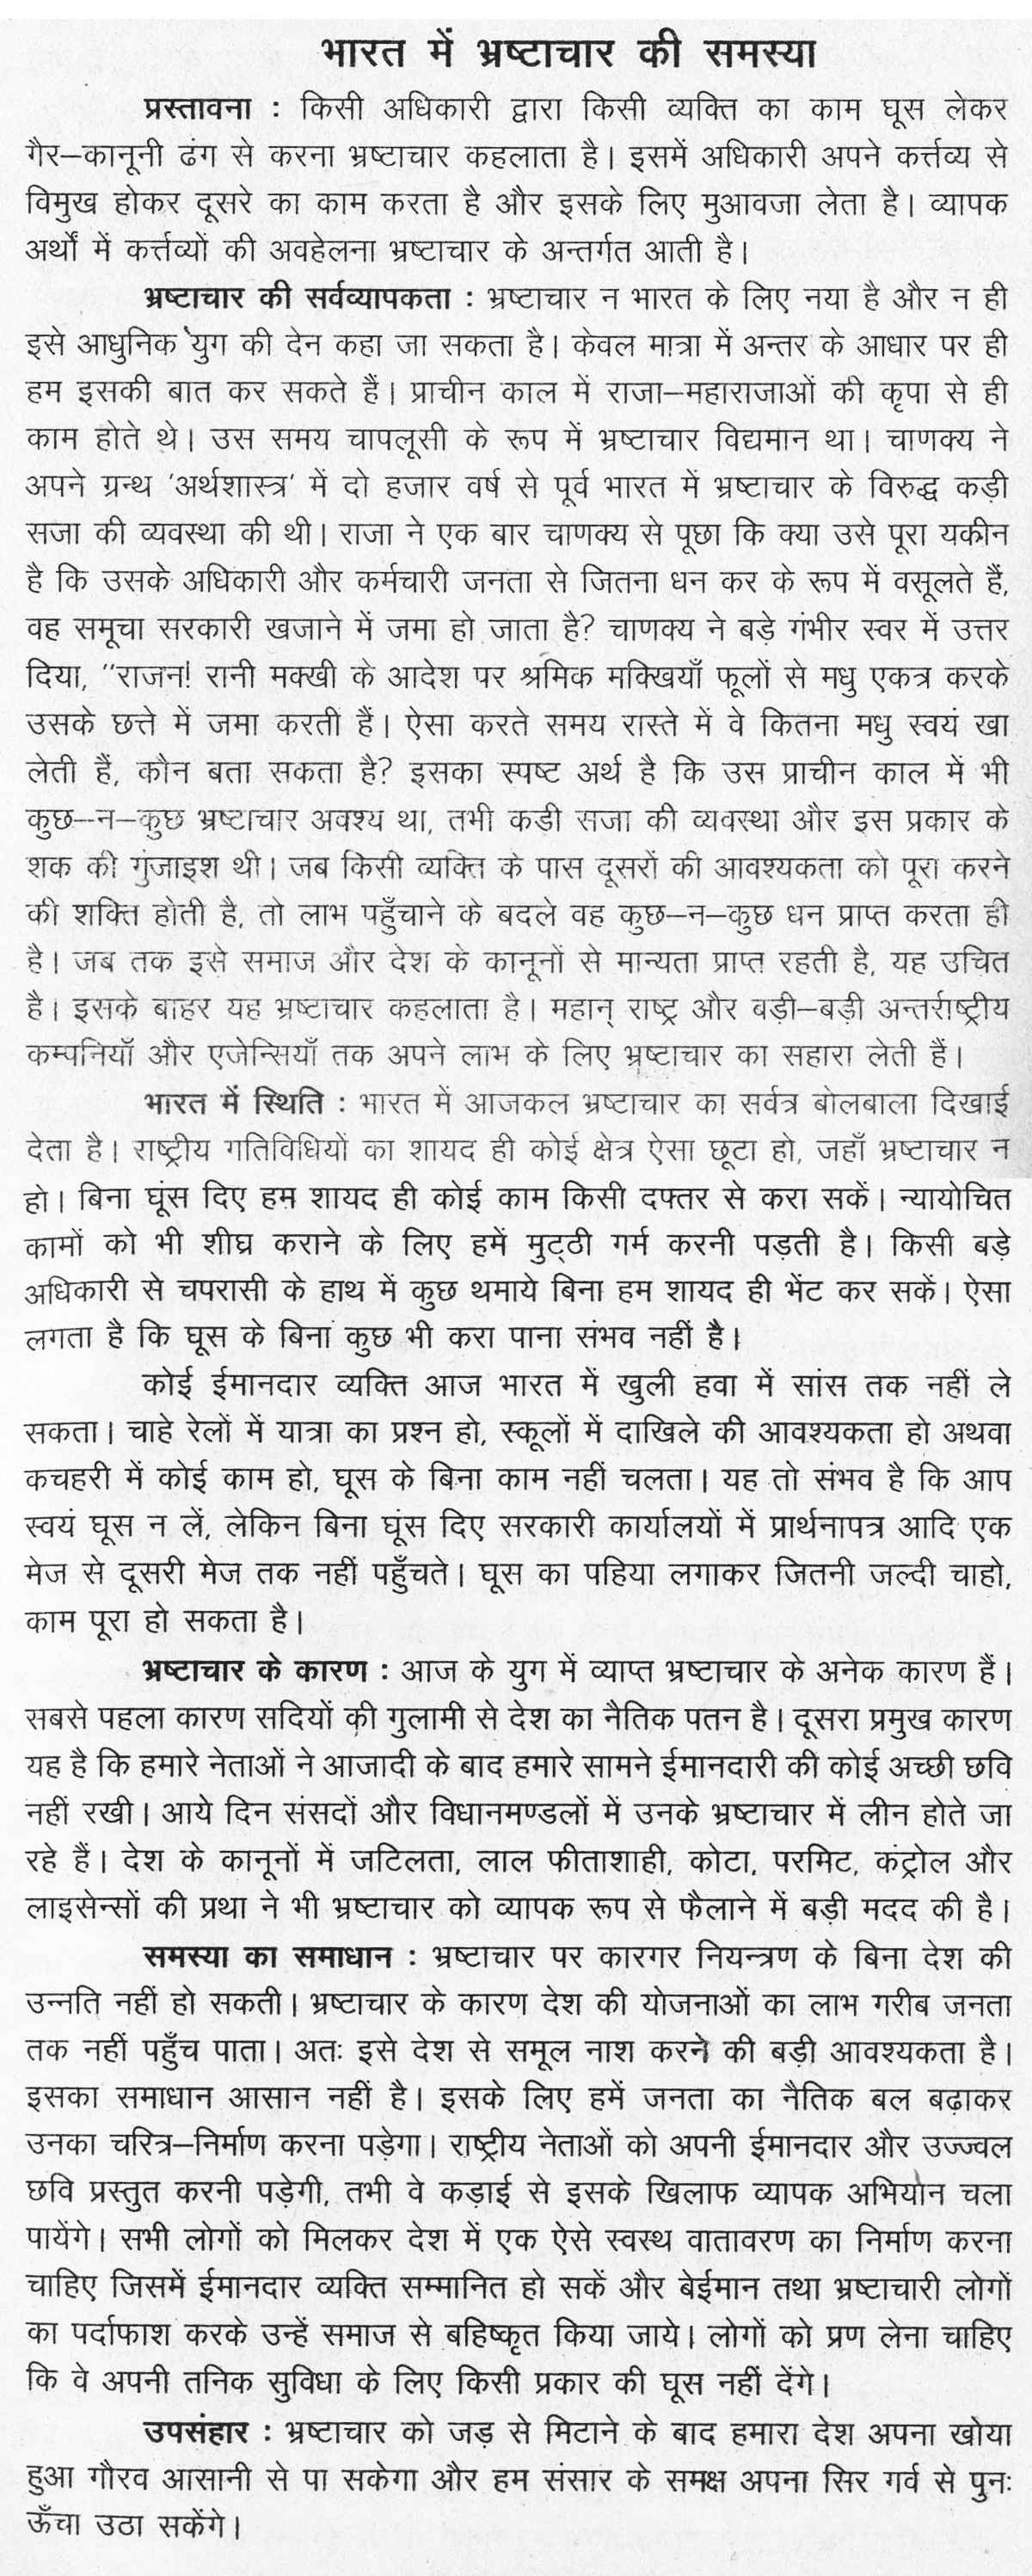 India and terrorism essay in hindi